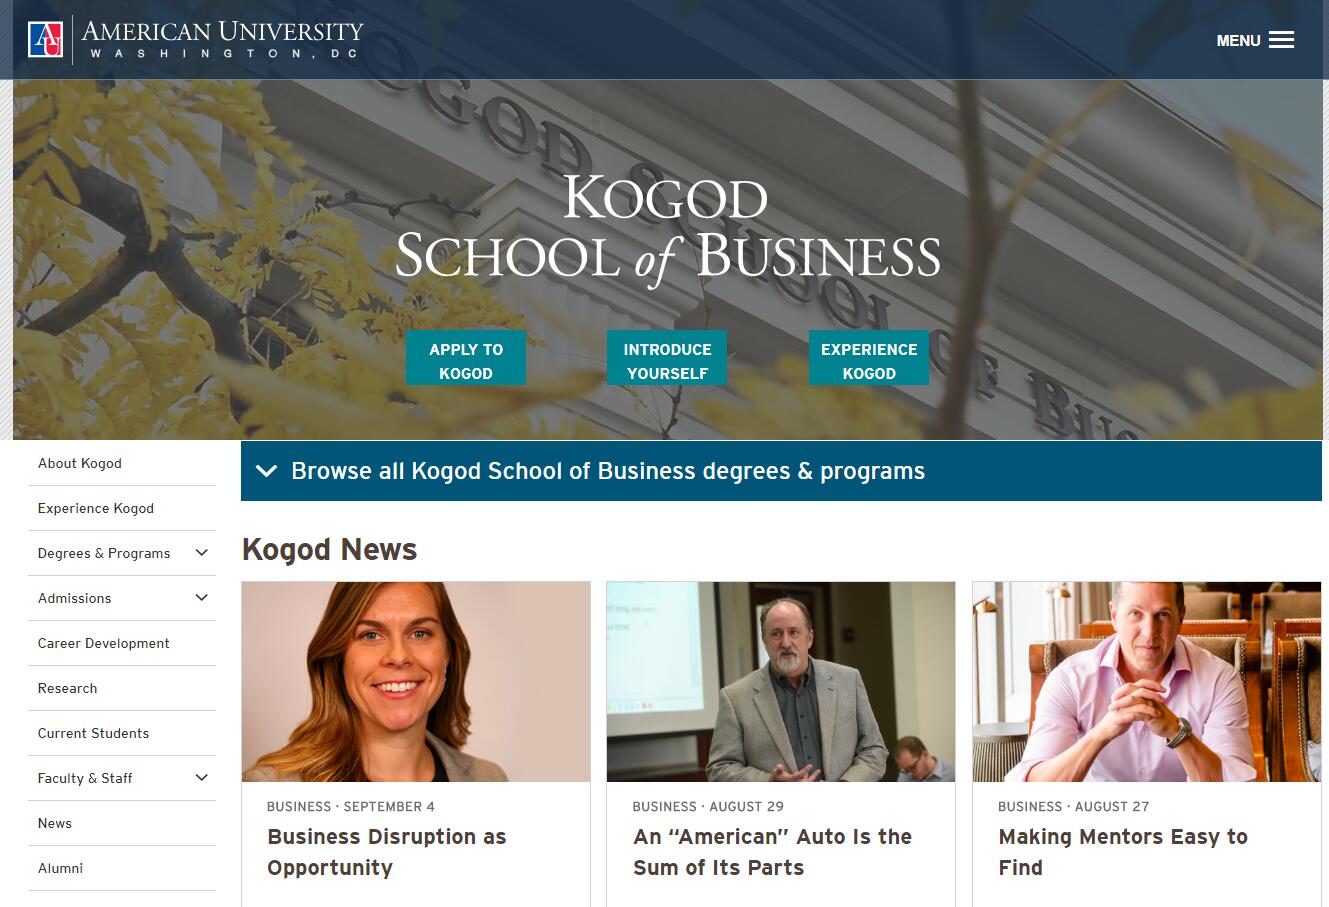 The Kogod School of Business at American University